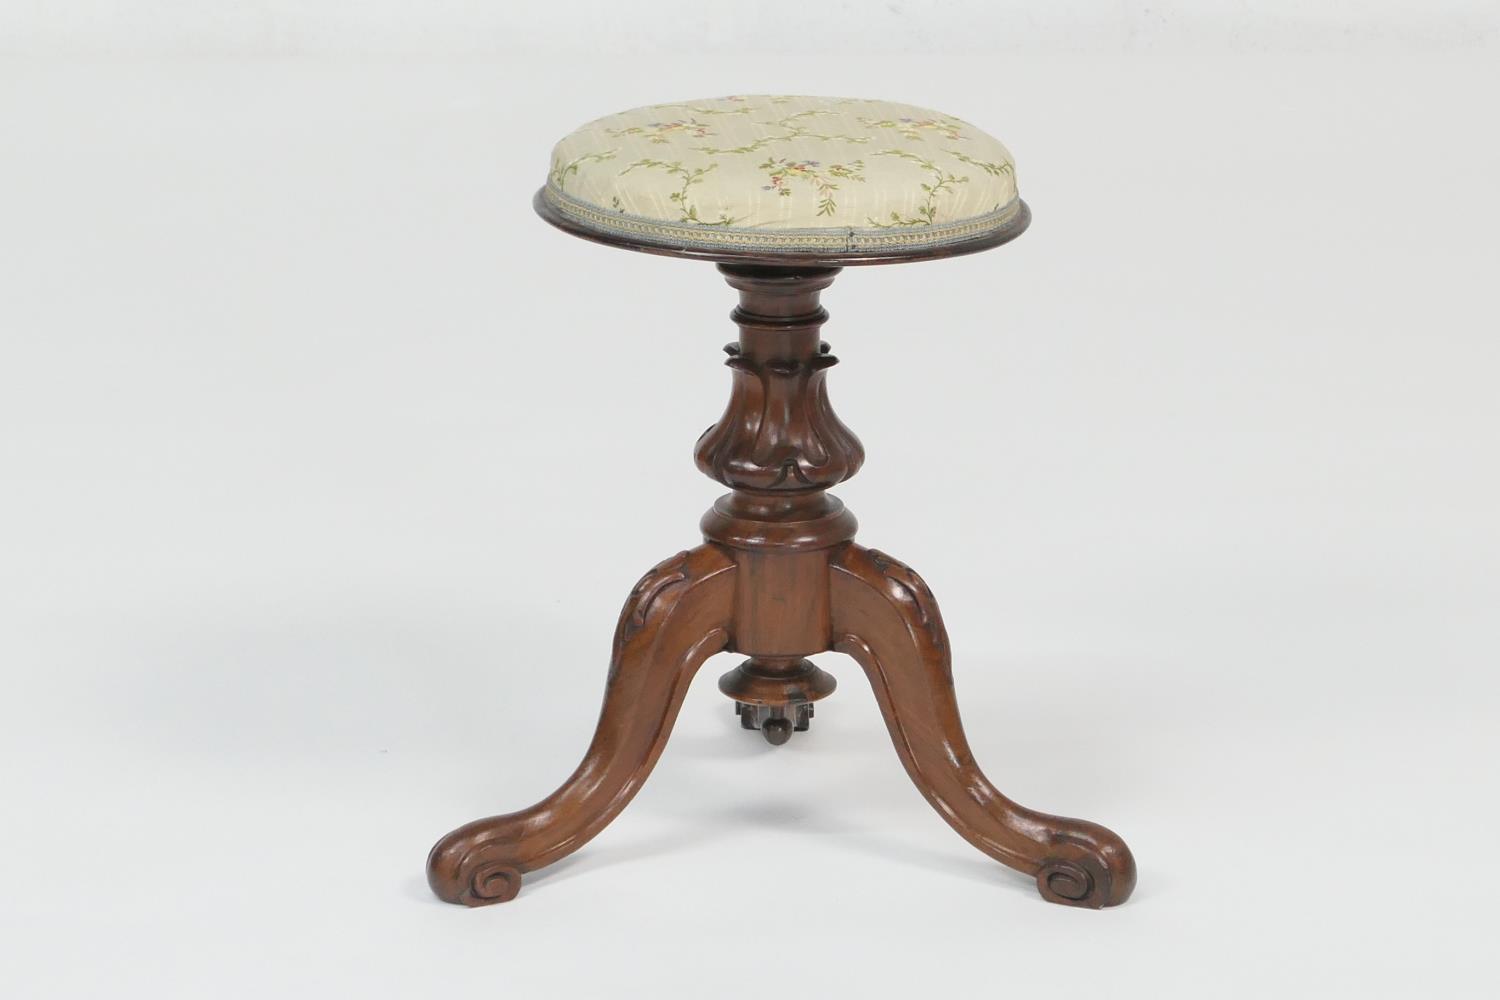 Victorian rosewood rise and fall piano stool, circa 1845, the circular pad seat upholstered in